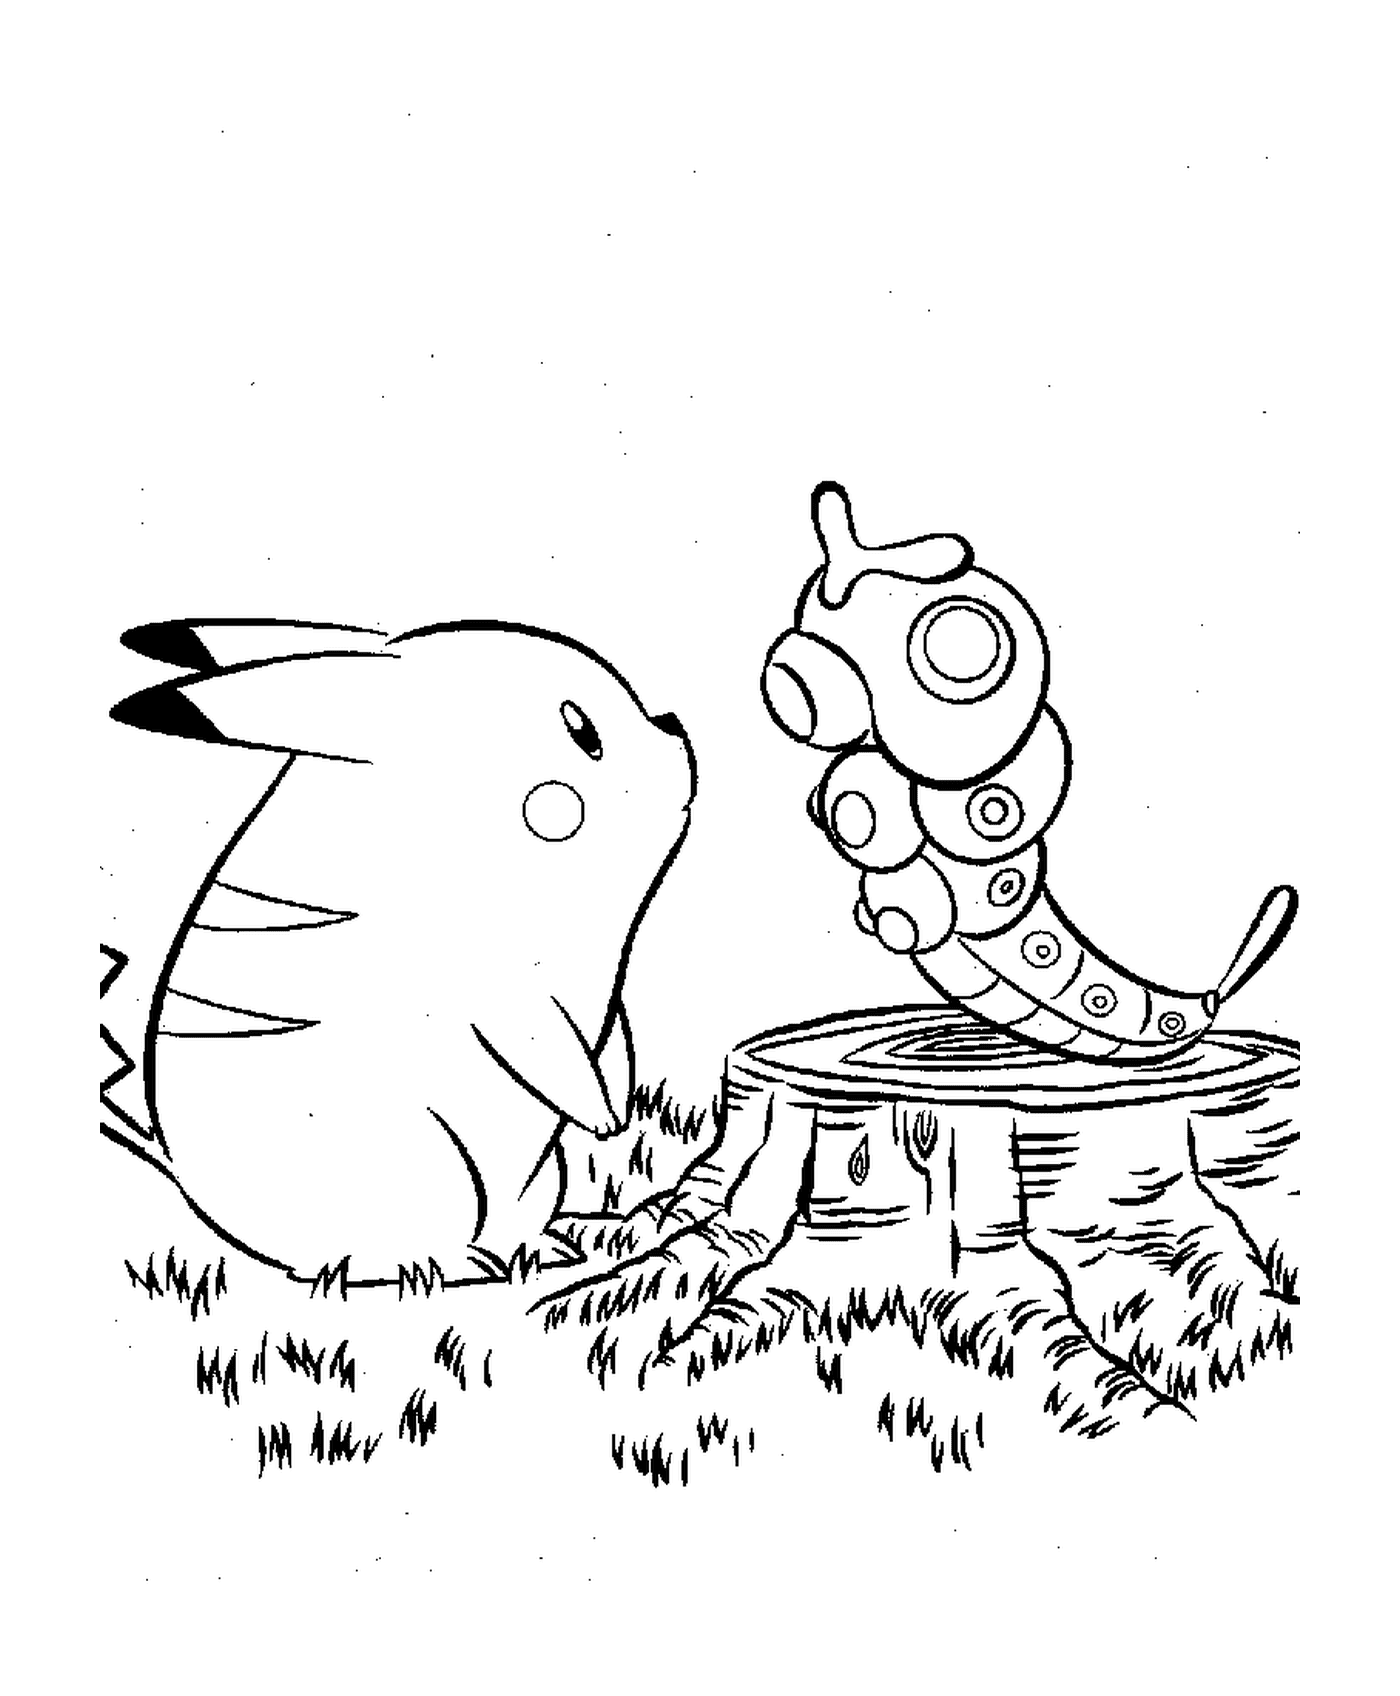  Pikachu accompanied by an insect 